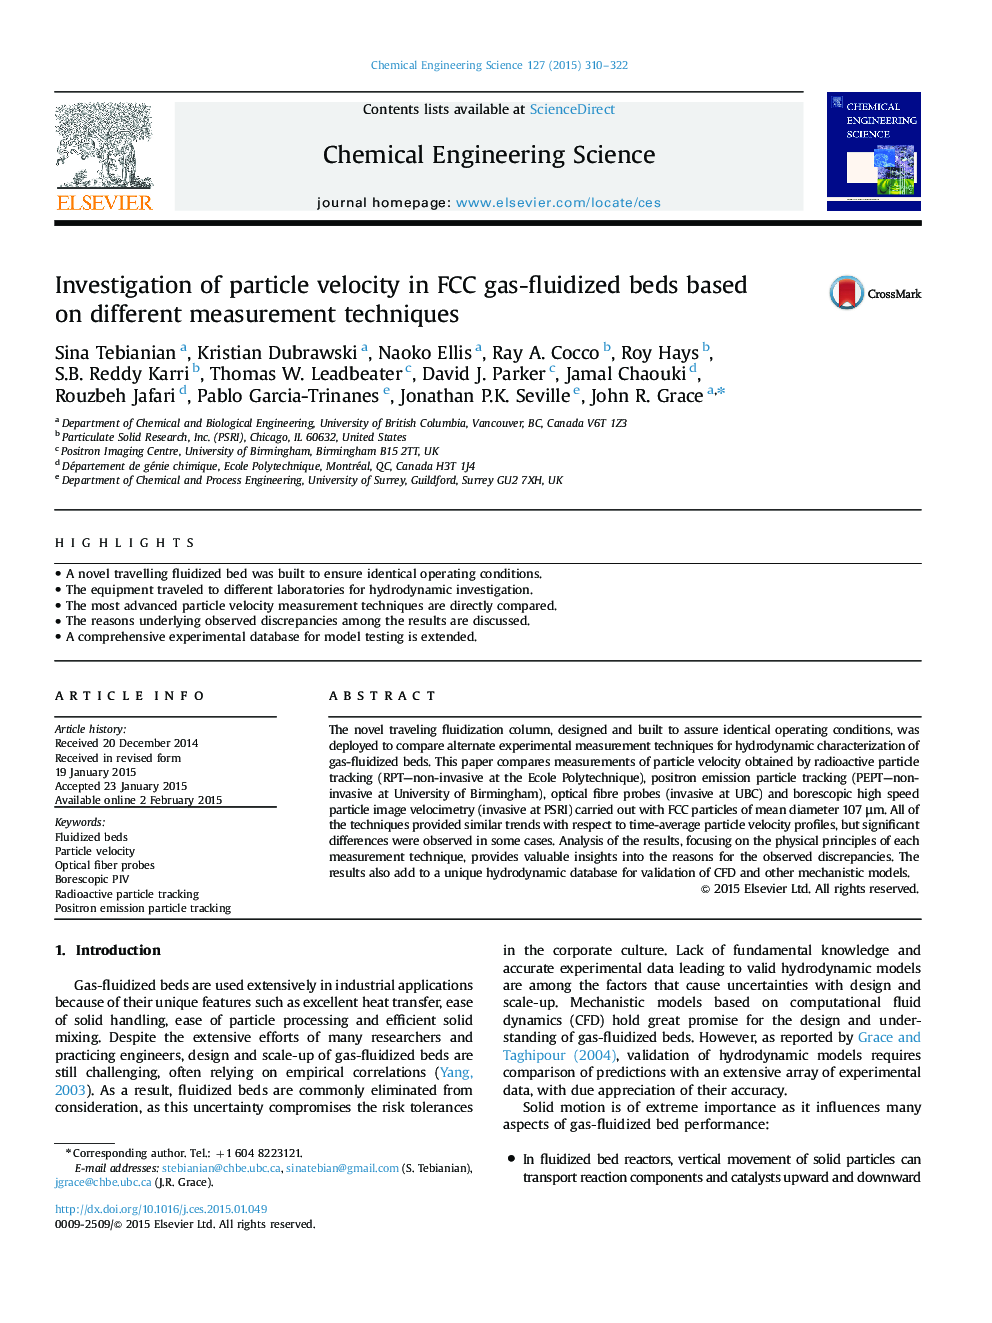 Investigation of particle velocity in FCC gas-fluidized beds based on different measurement techniques